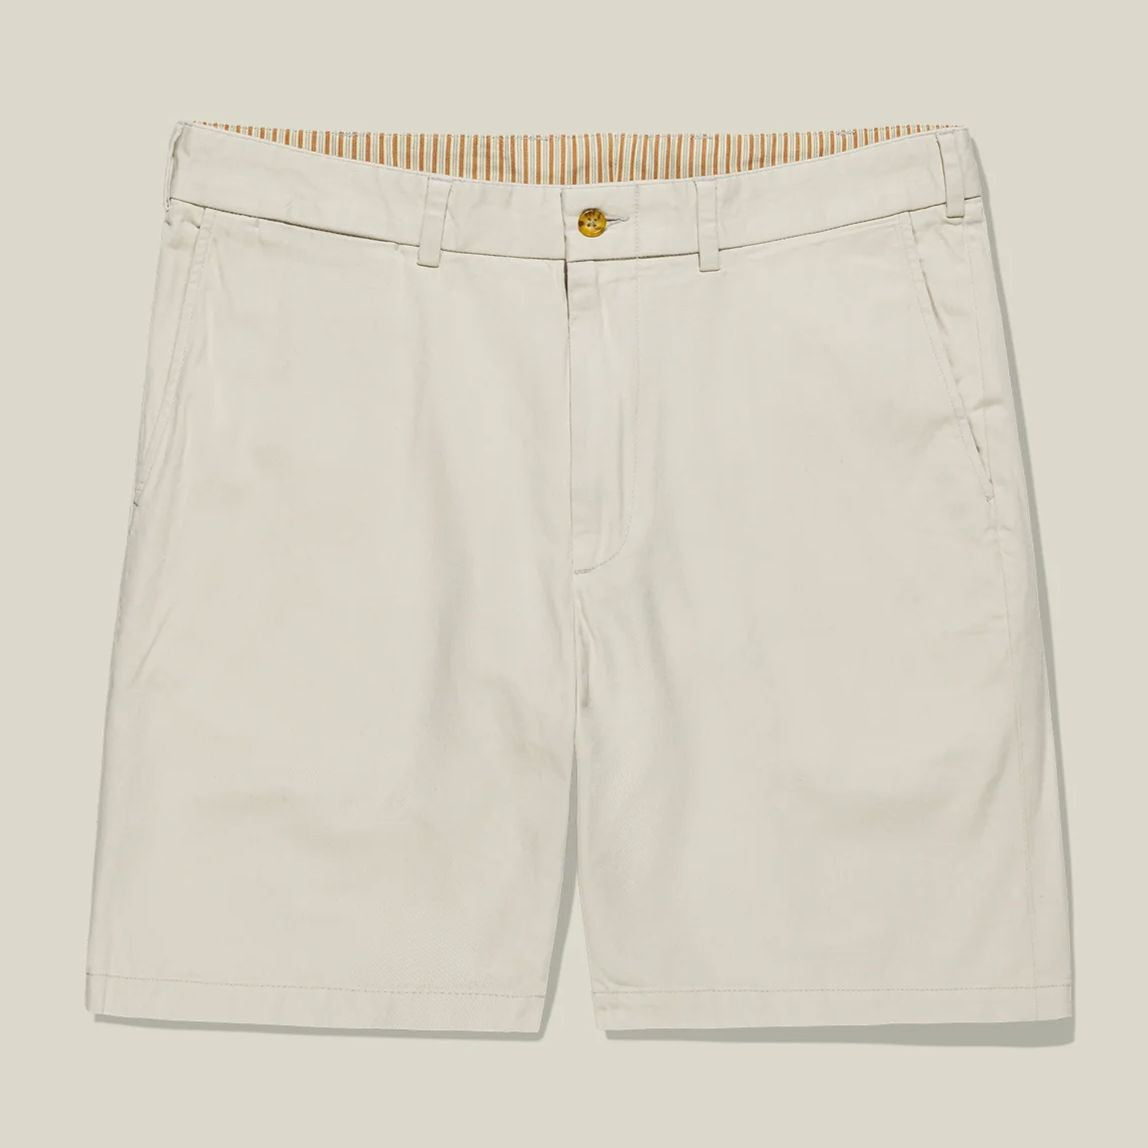 M2 Classic Fit Vintage Twill Shorts in Stone by Bills Khakis